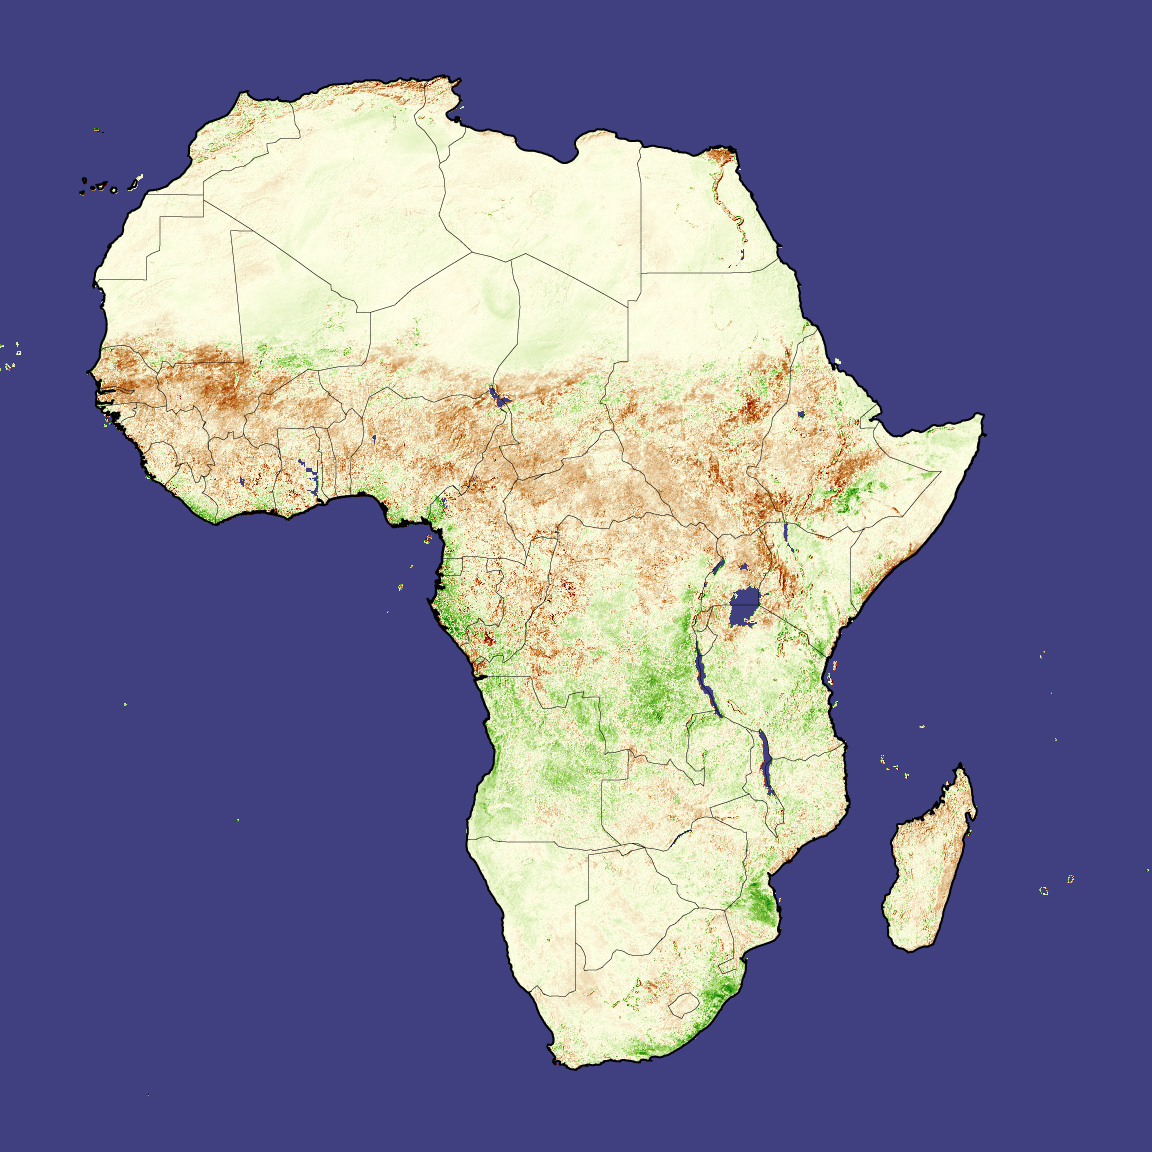 Africa Drought Map